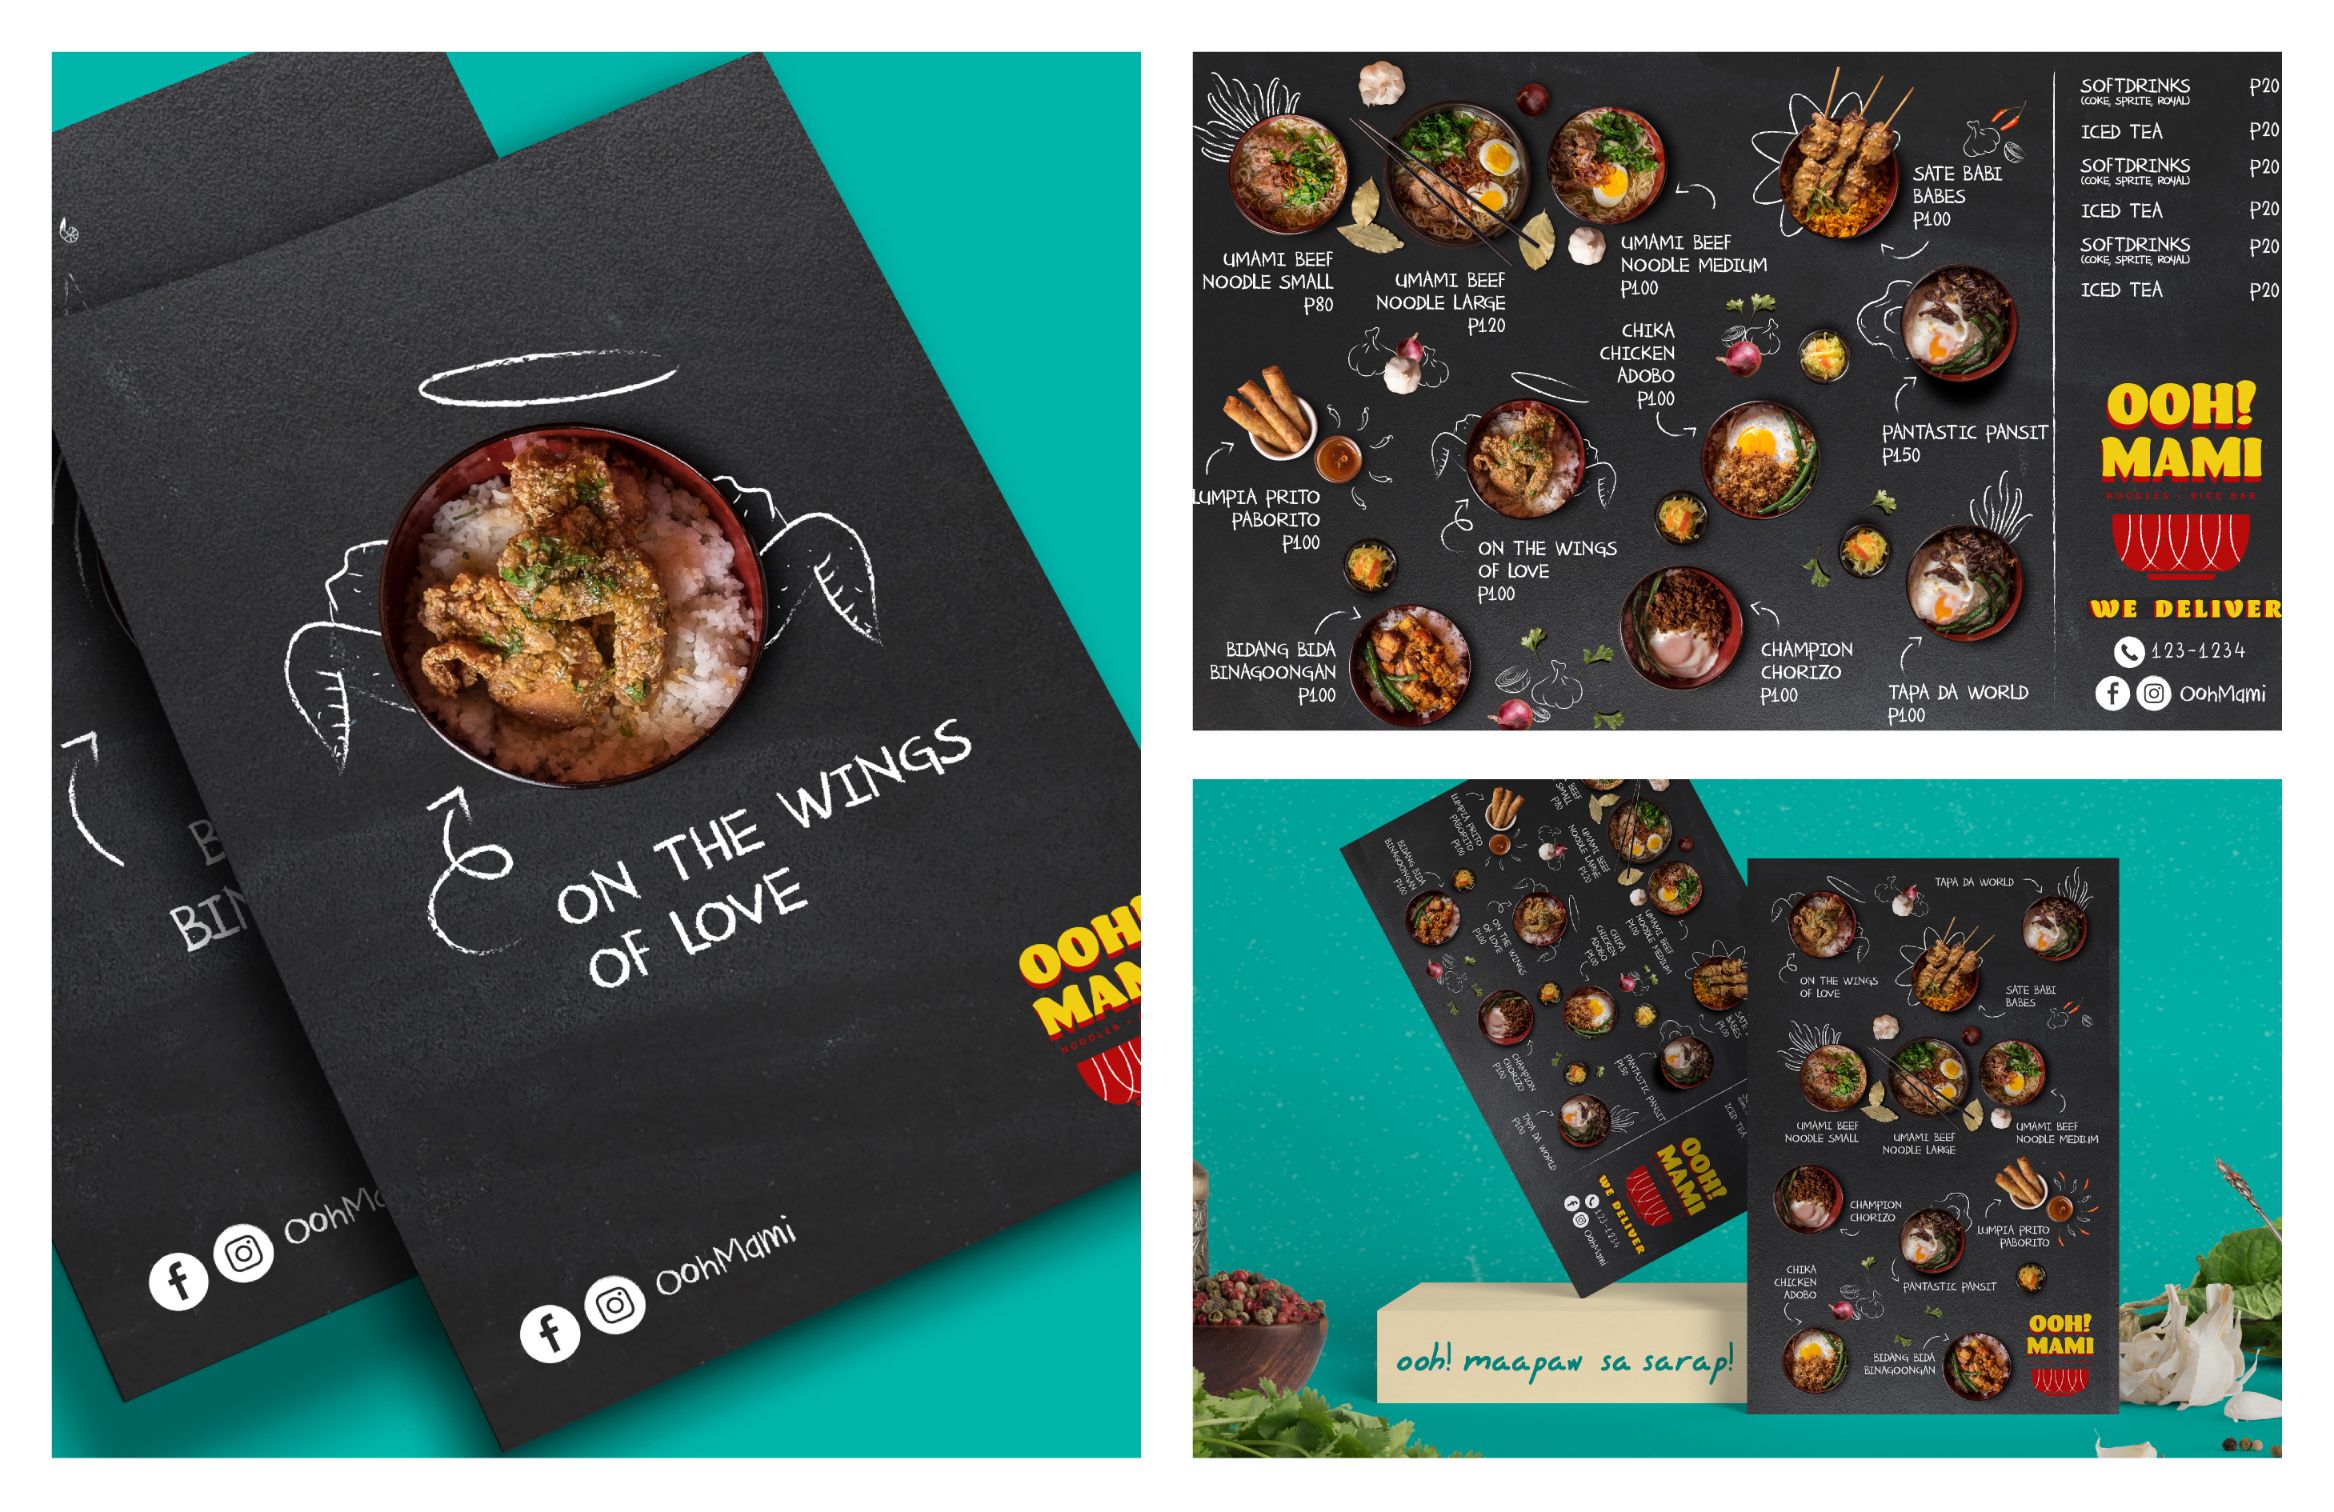 Images of menu design of the brand